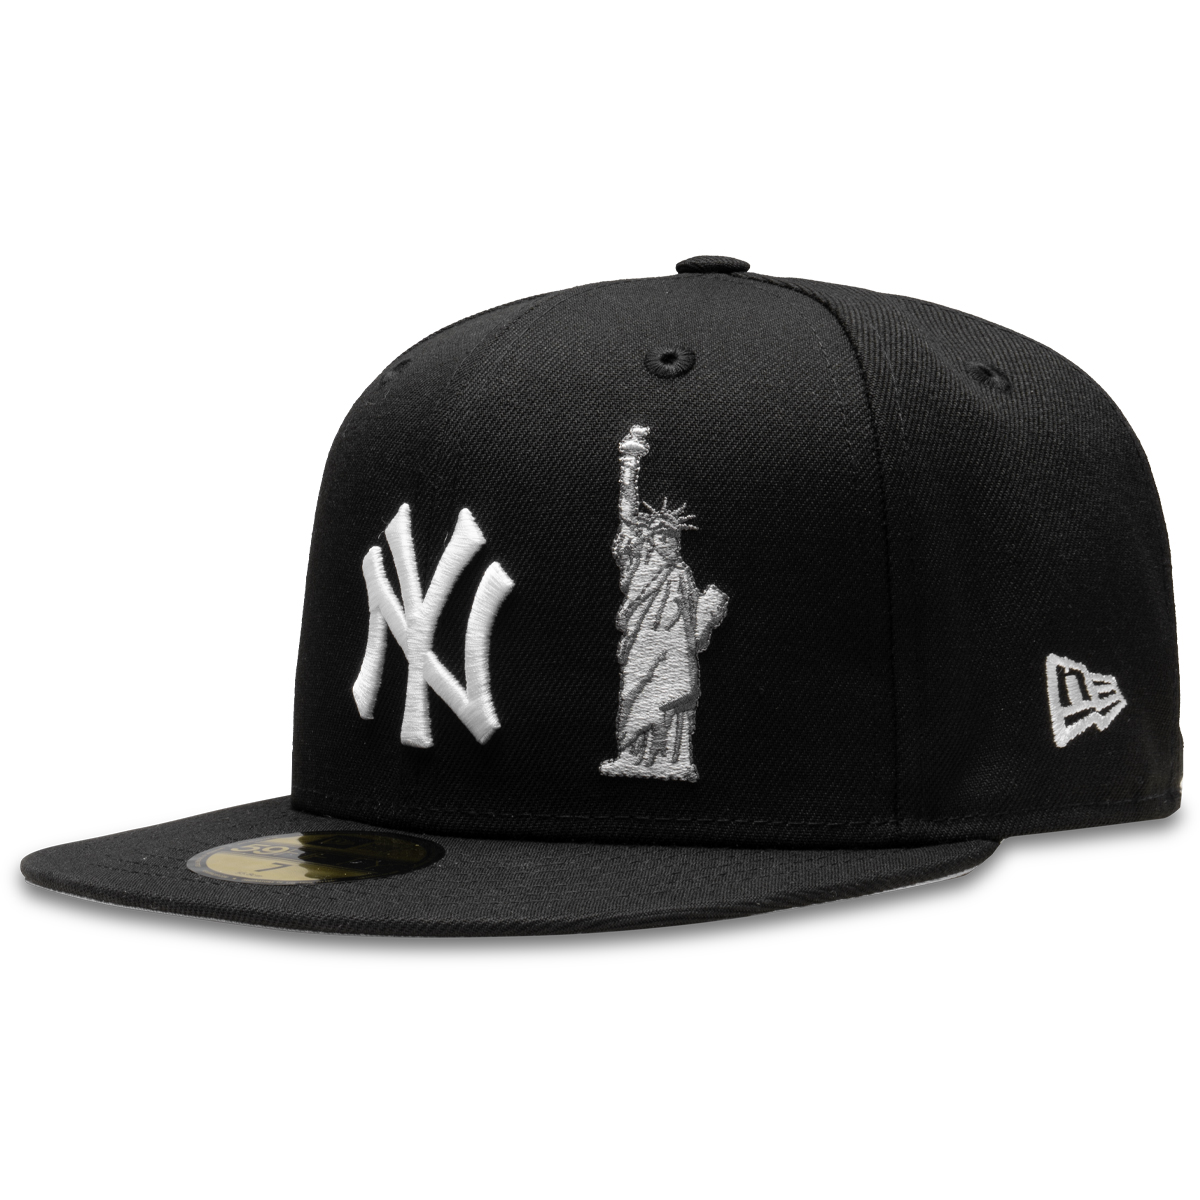 Buy MLB NEW YORK YANKEES 1996 WORLD SERIES PATCH 59FIFTY CAP for EUR 26 ...